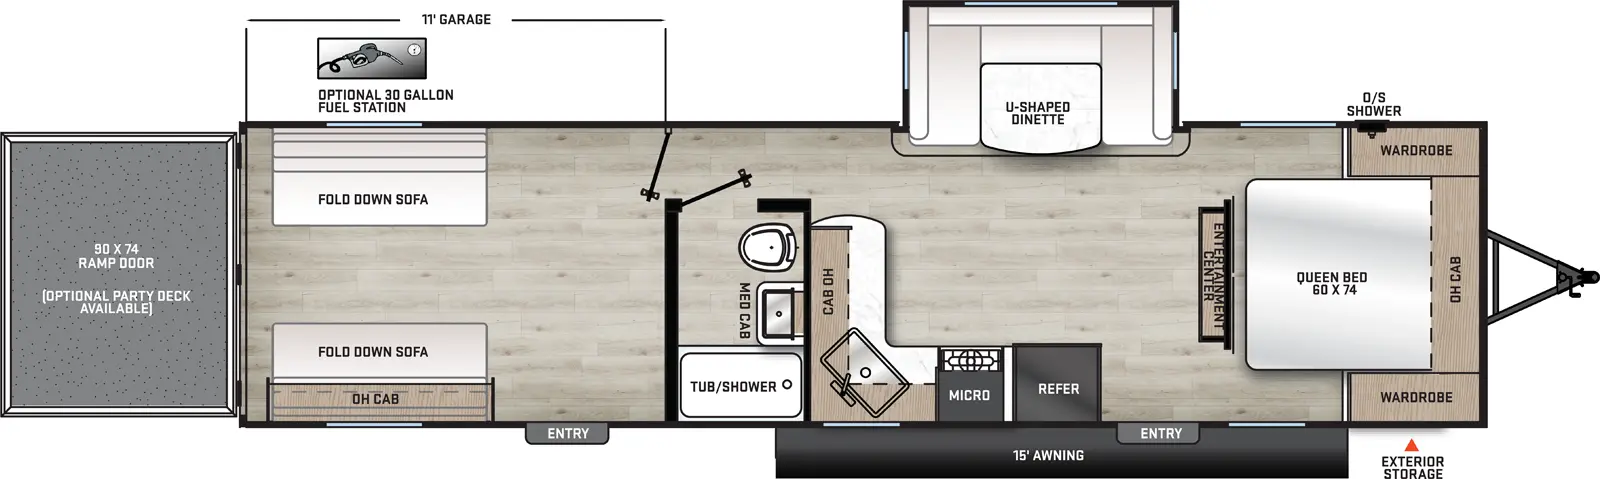 The 29ATH has one slide out on the off-door side and two entry doors on the door side. Interior layout from front to back: foot facing queen bed with overhead cabinet and wardrobes on either side; entertainment center; off-door side slide out containing u-shaped dinette; door side kitchen containing refrigerator, cook top stove, microwave cabinet, double basin sink, and overhead cabinet; door side bathroom; and dinette table with fold down sofa.